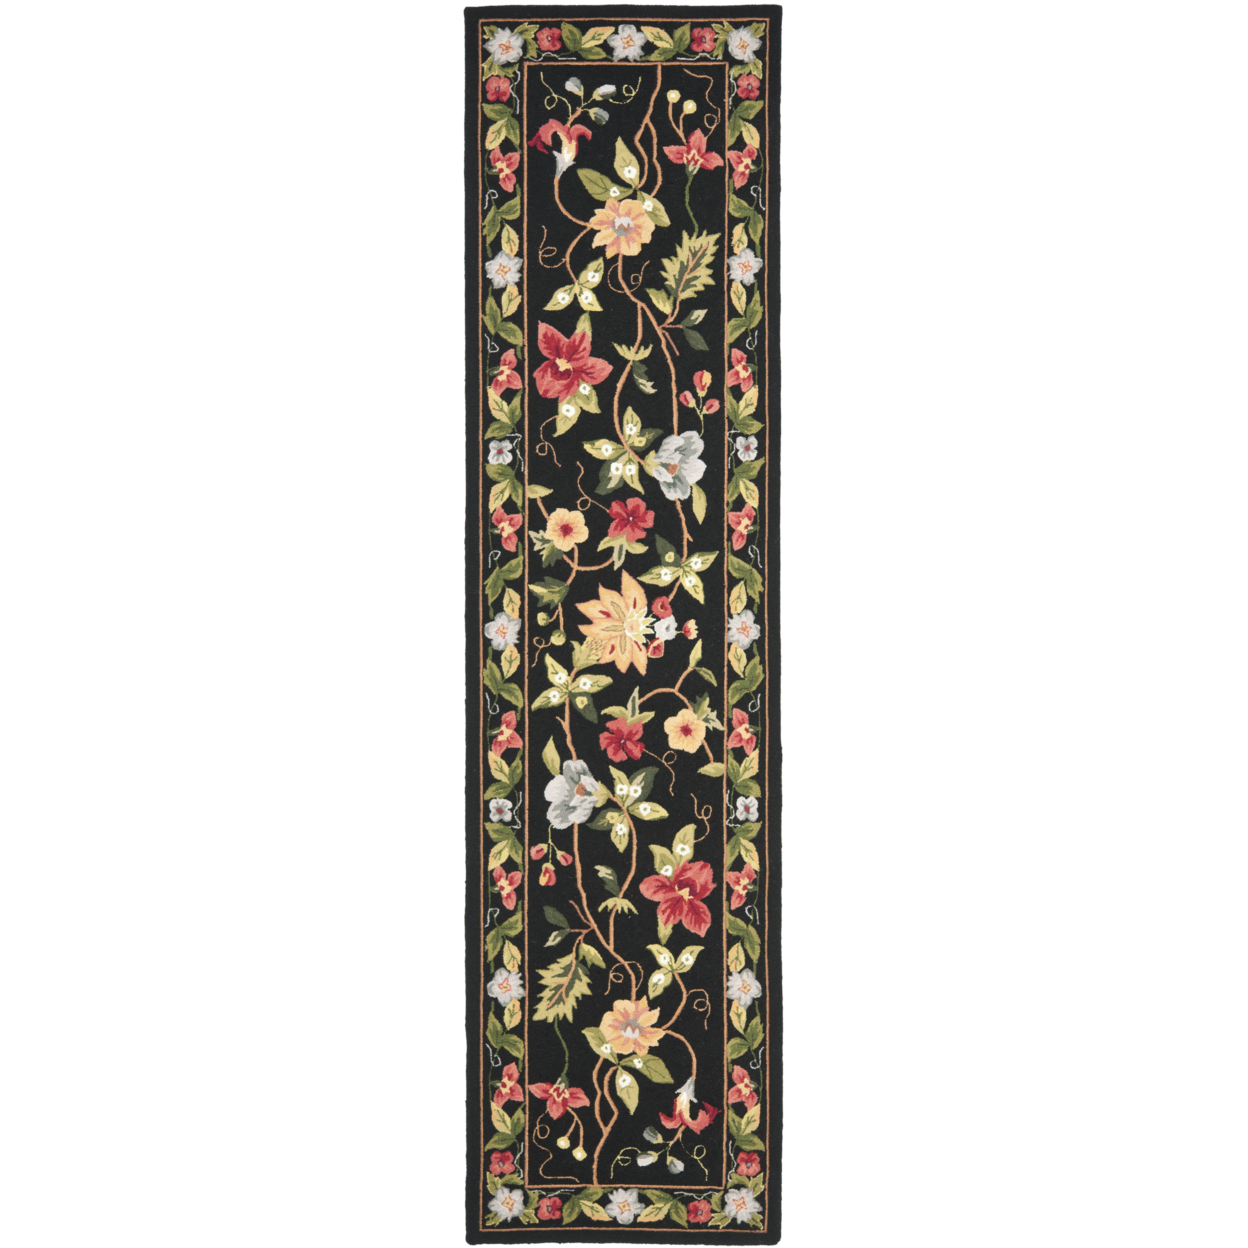 SAFAVIEH Chelsea Collection HK311A Hand-hooked Black Rug